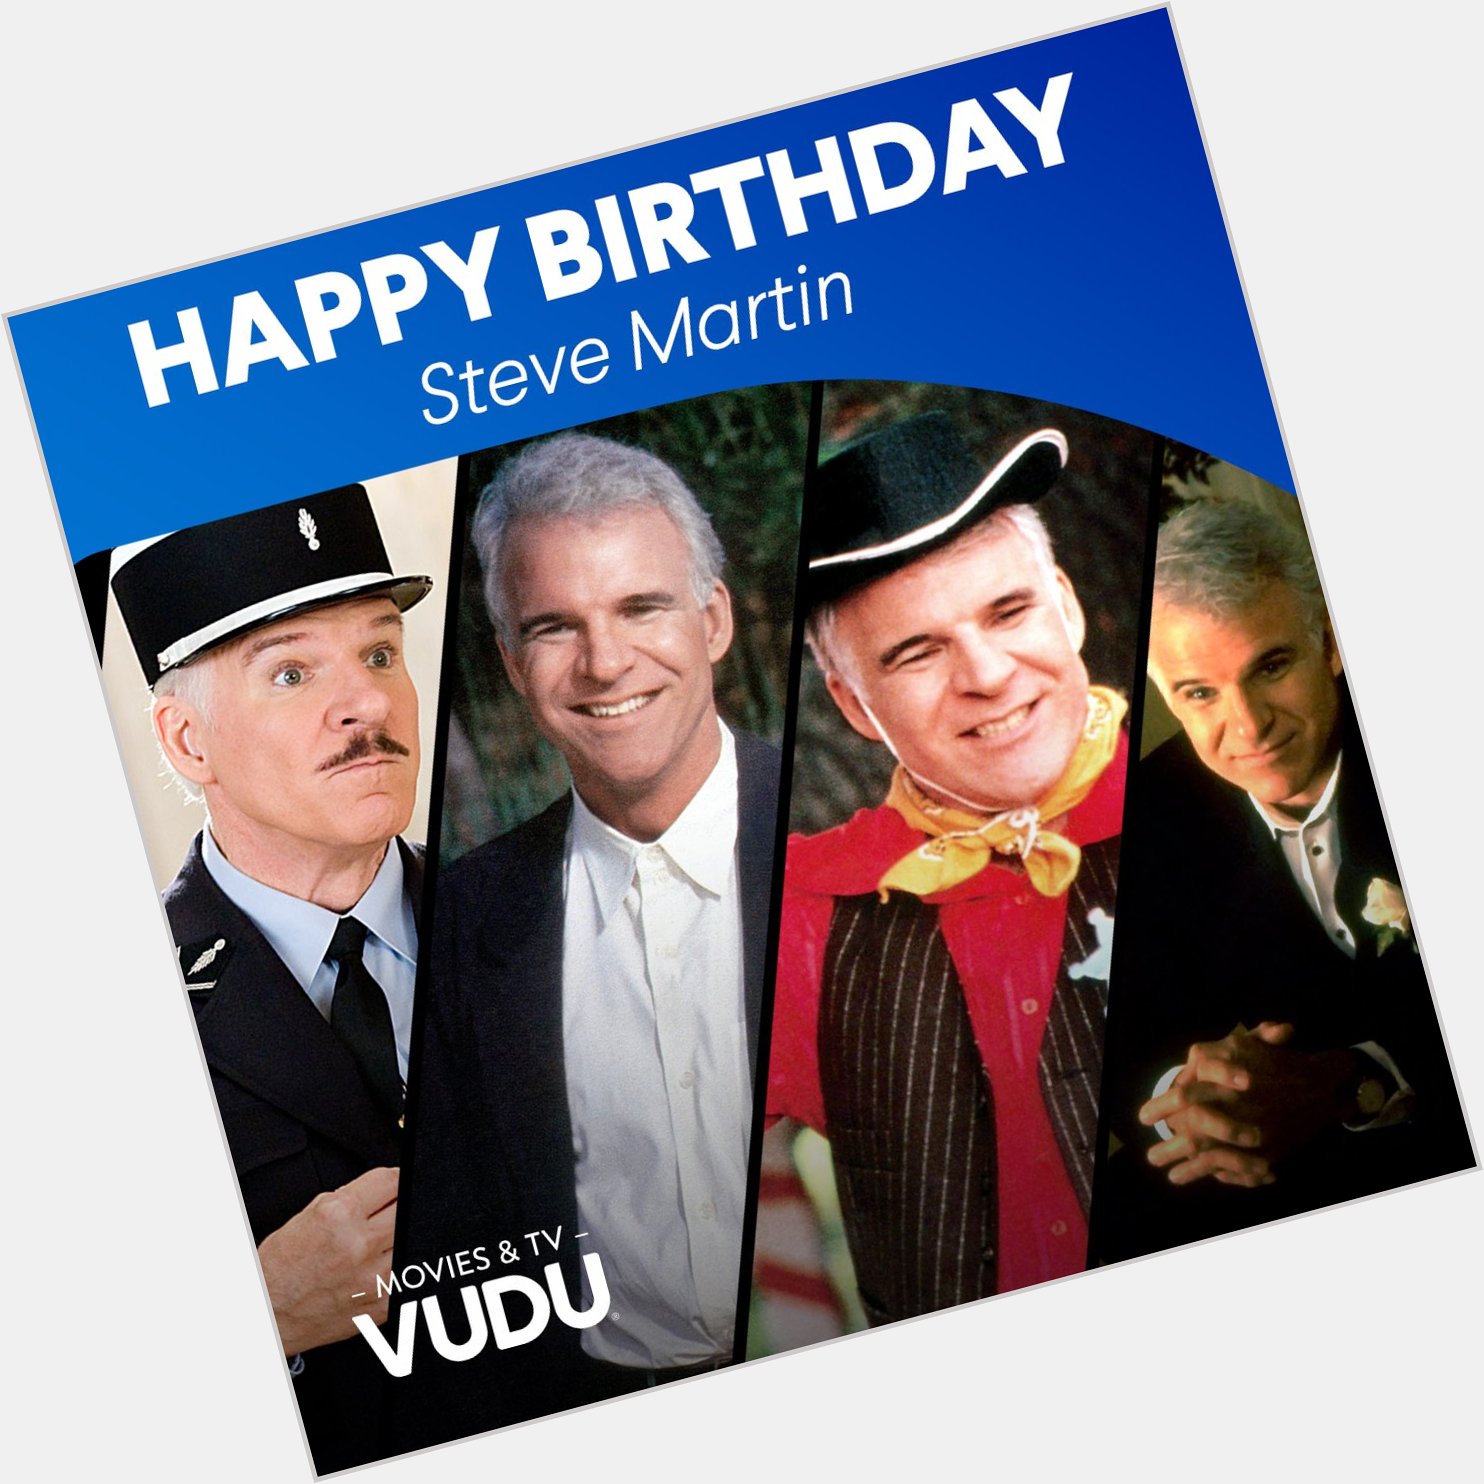 Wishing Steve Martin a very Happy Birthday. What do you think is his funniest character? 